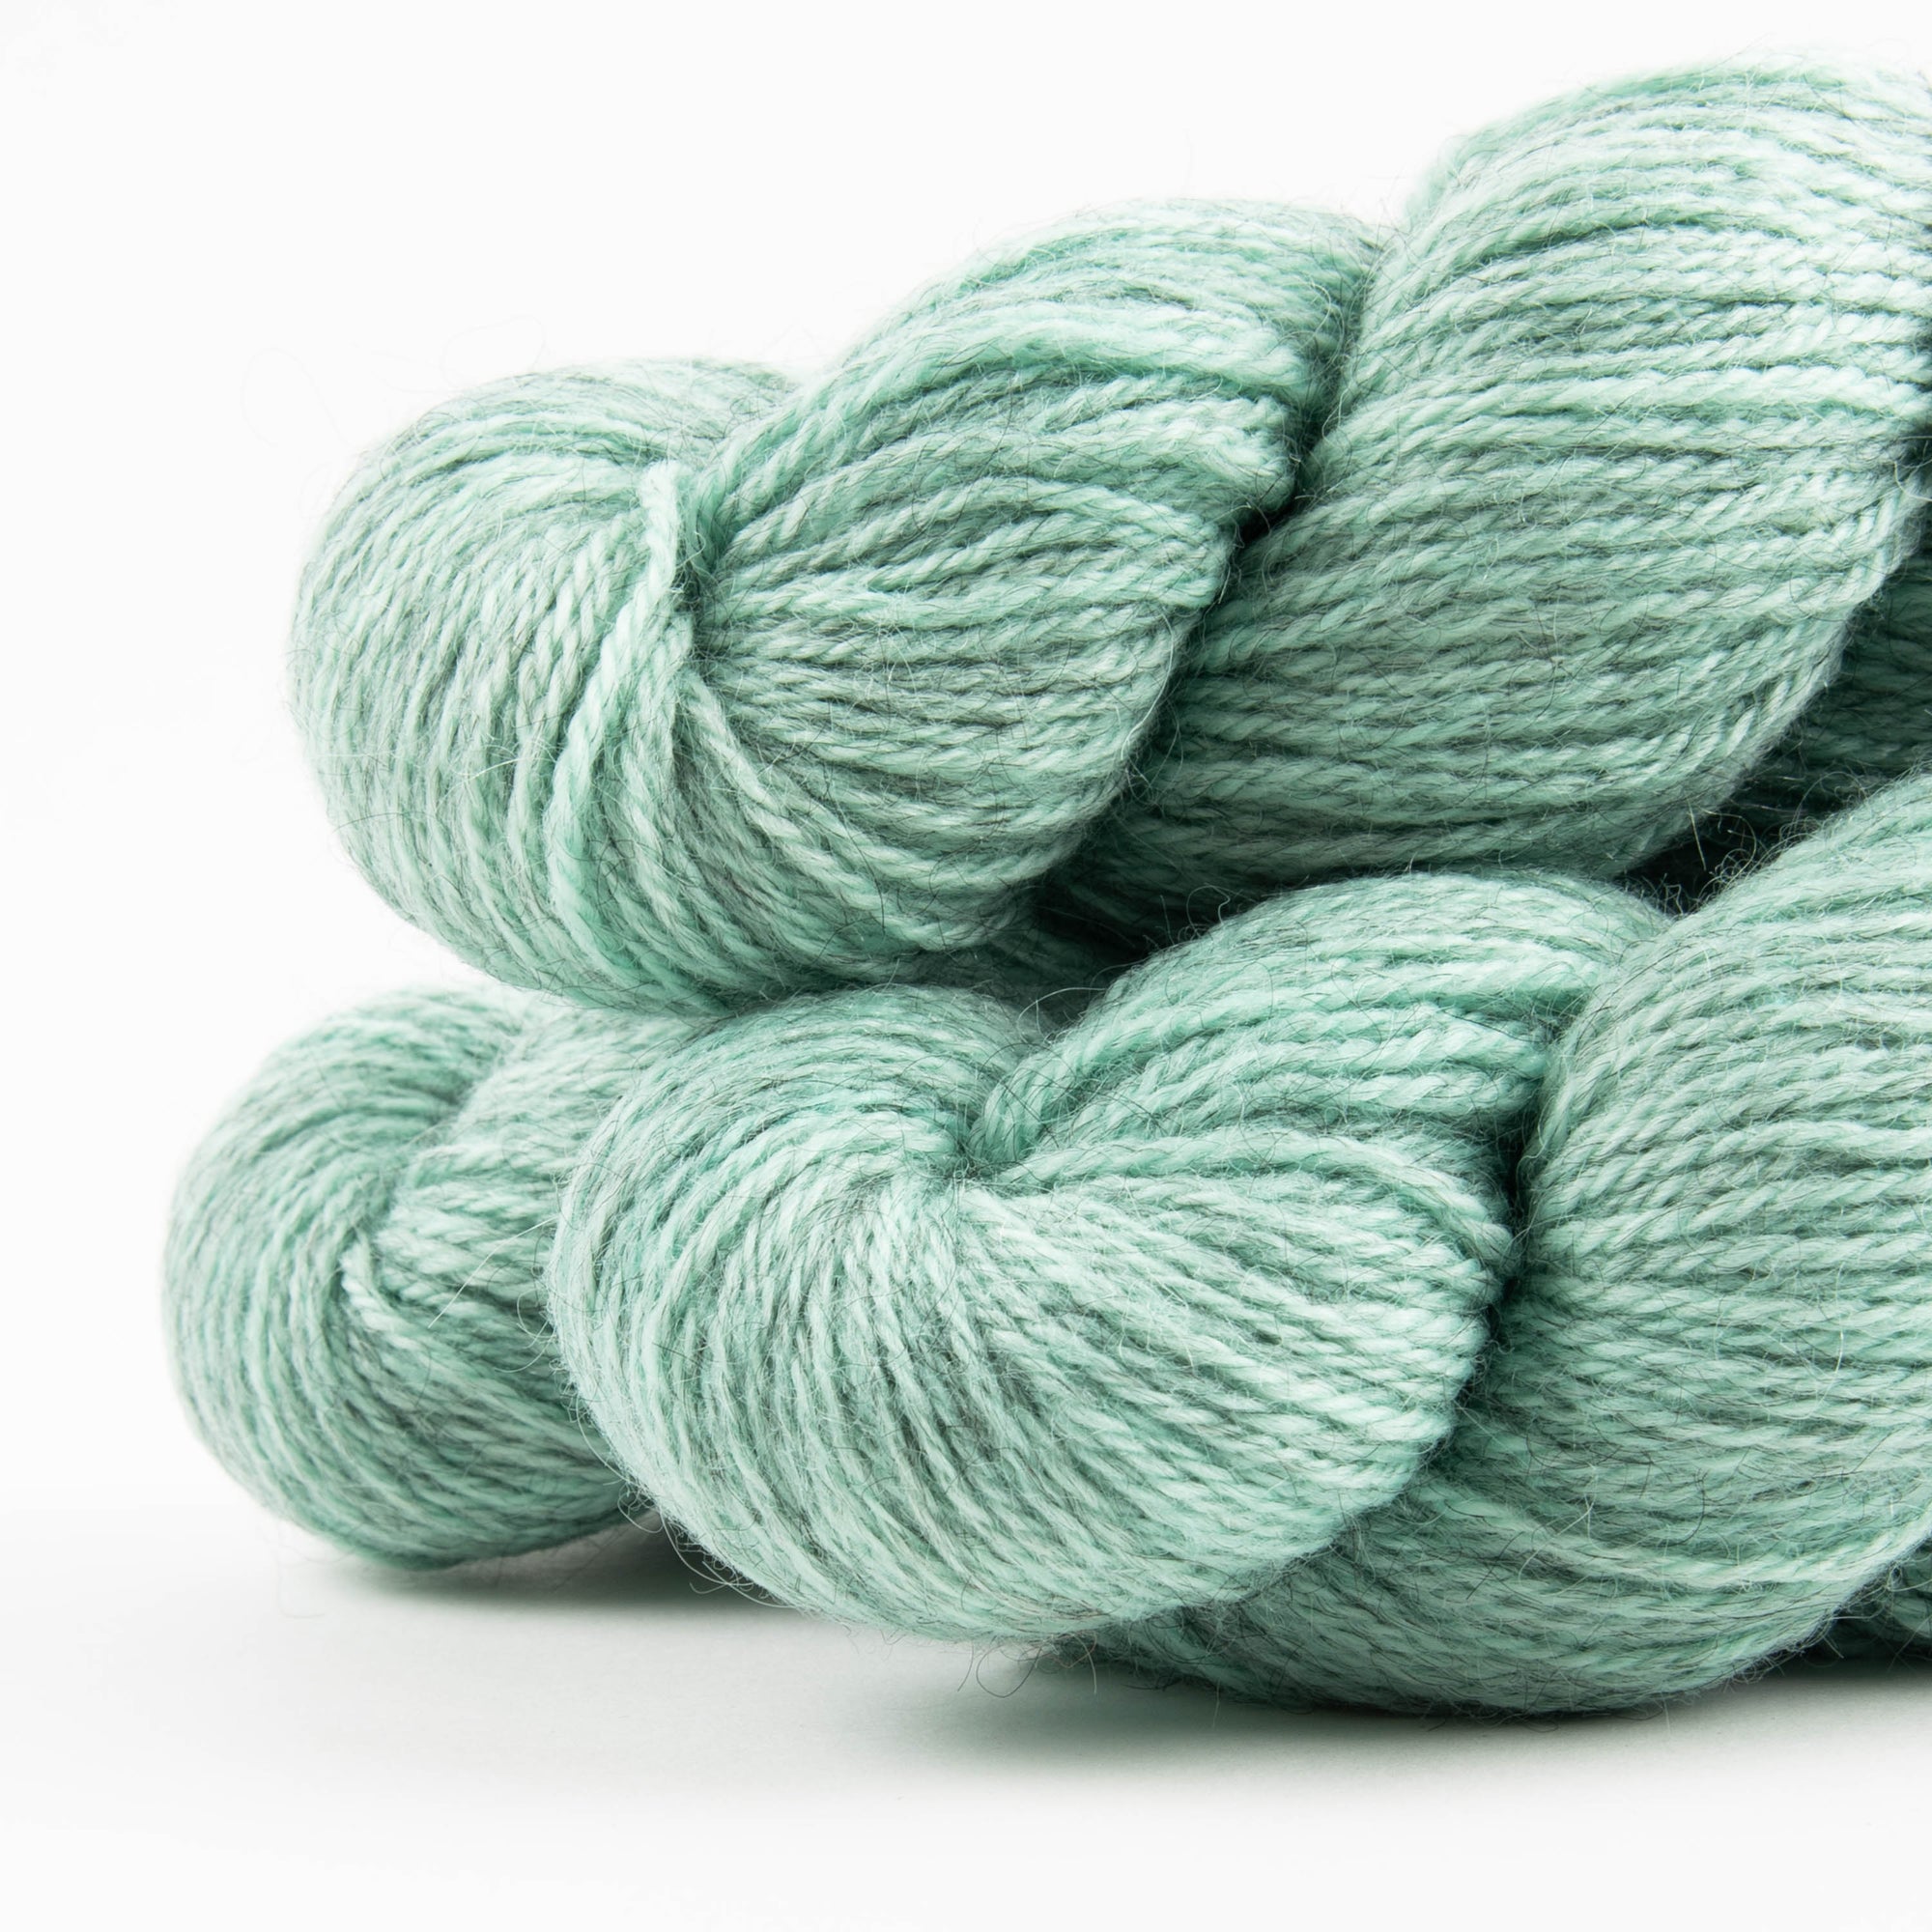 CORRIE WORSTED - SEAGLASS